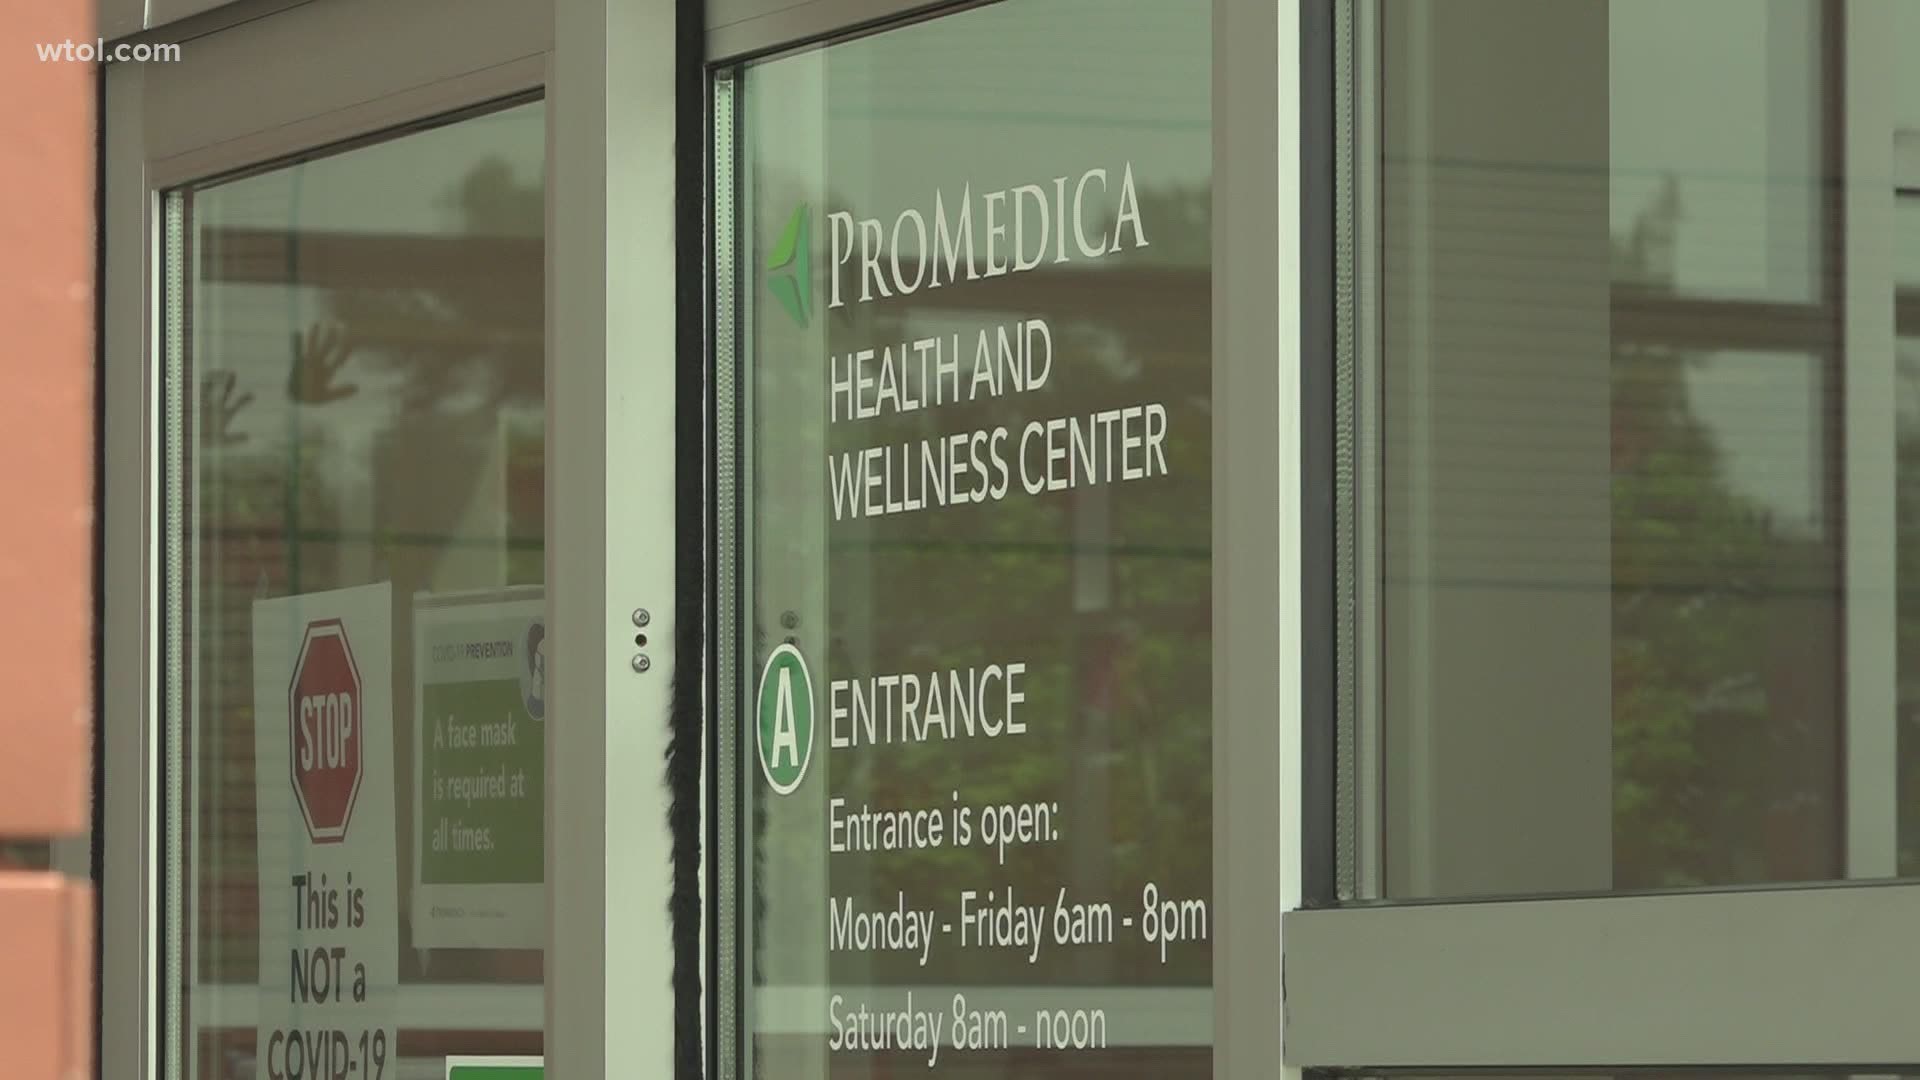 The coronavirus has caused a decrease in child wellness visits in Ohio. Local doctors are now concerned about a possible resurgence of preventable diseases.